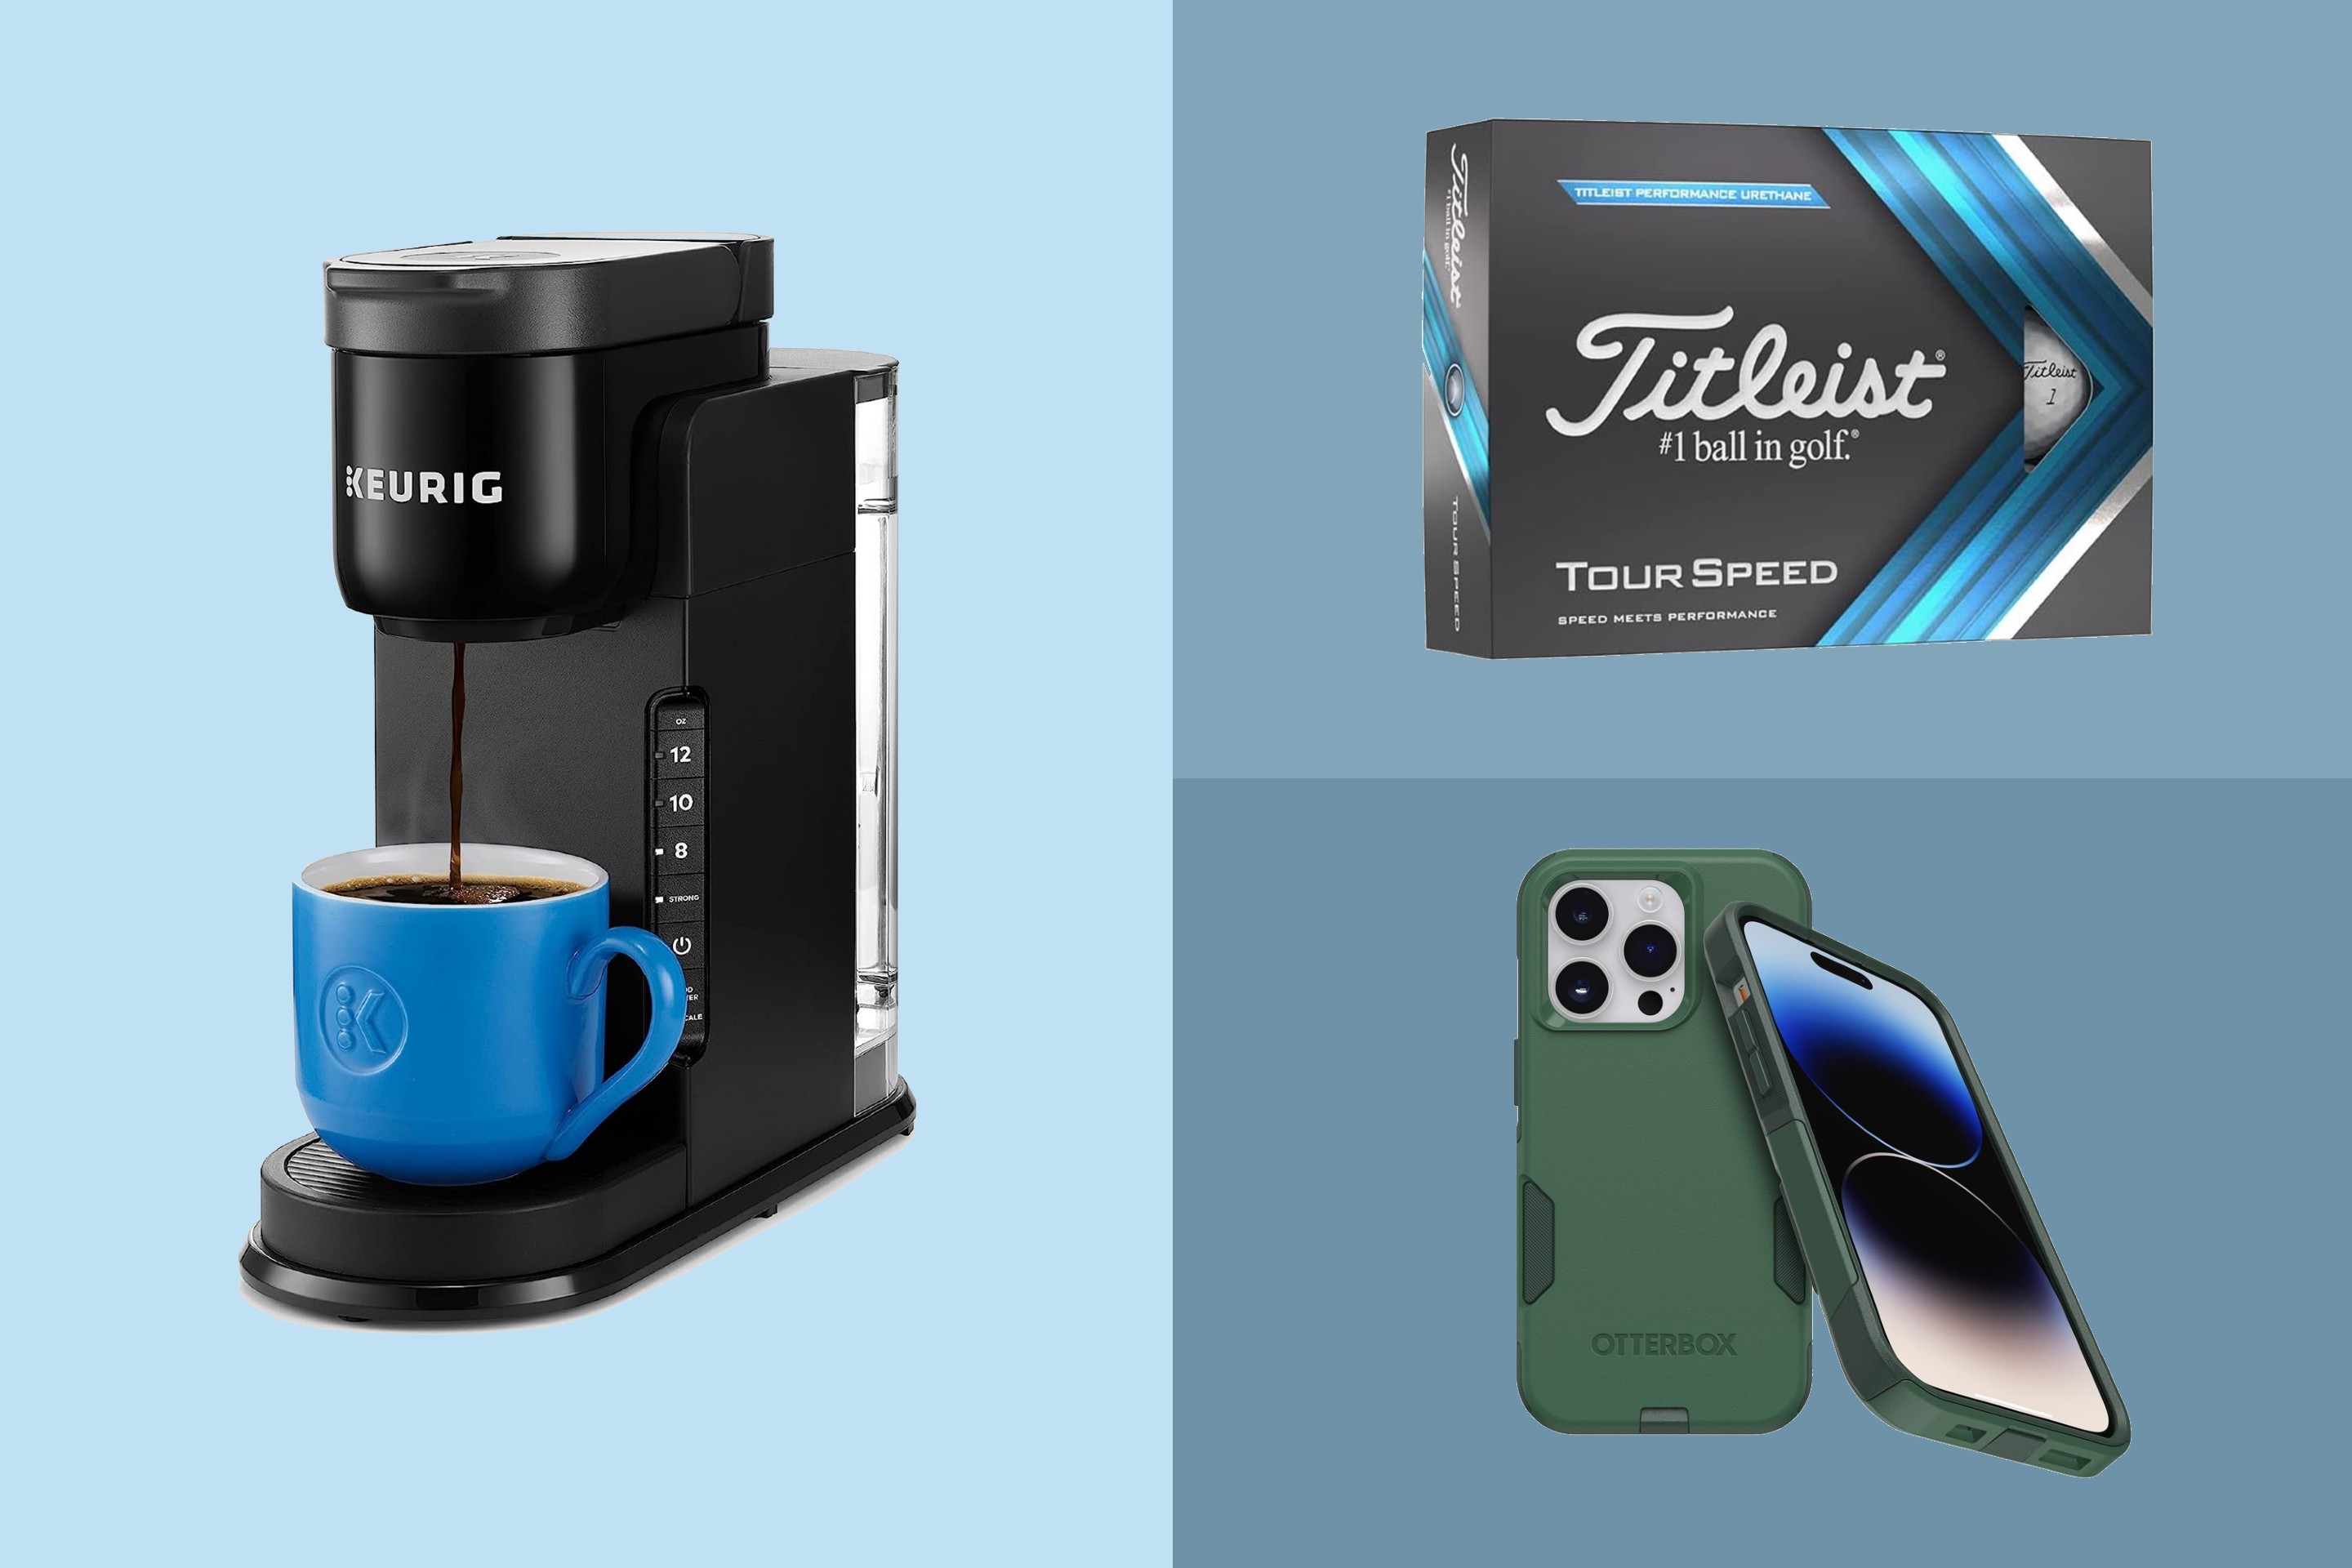 Save up to 50% on These Prime Day Deals